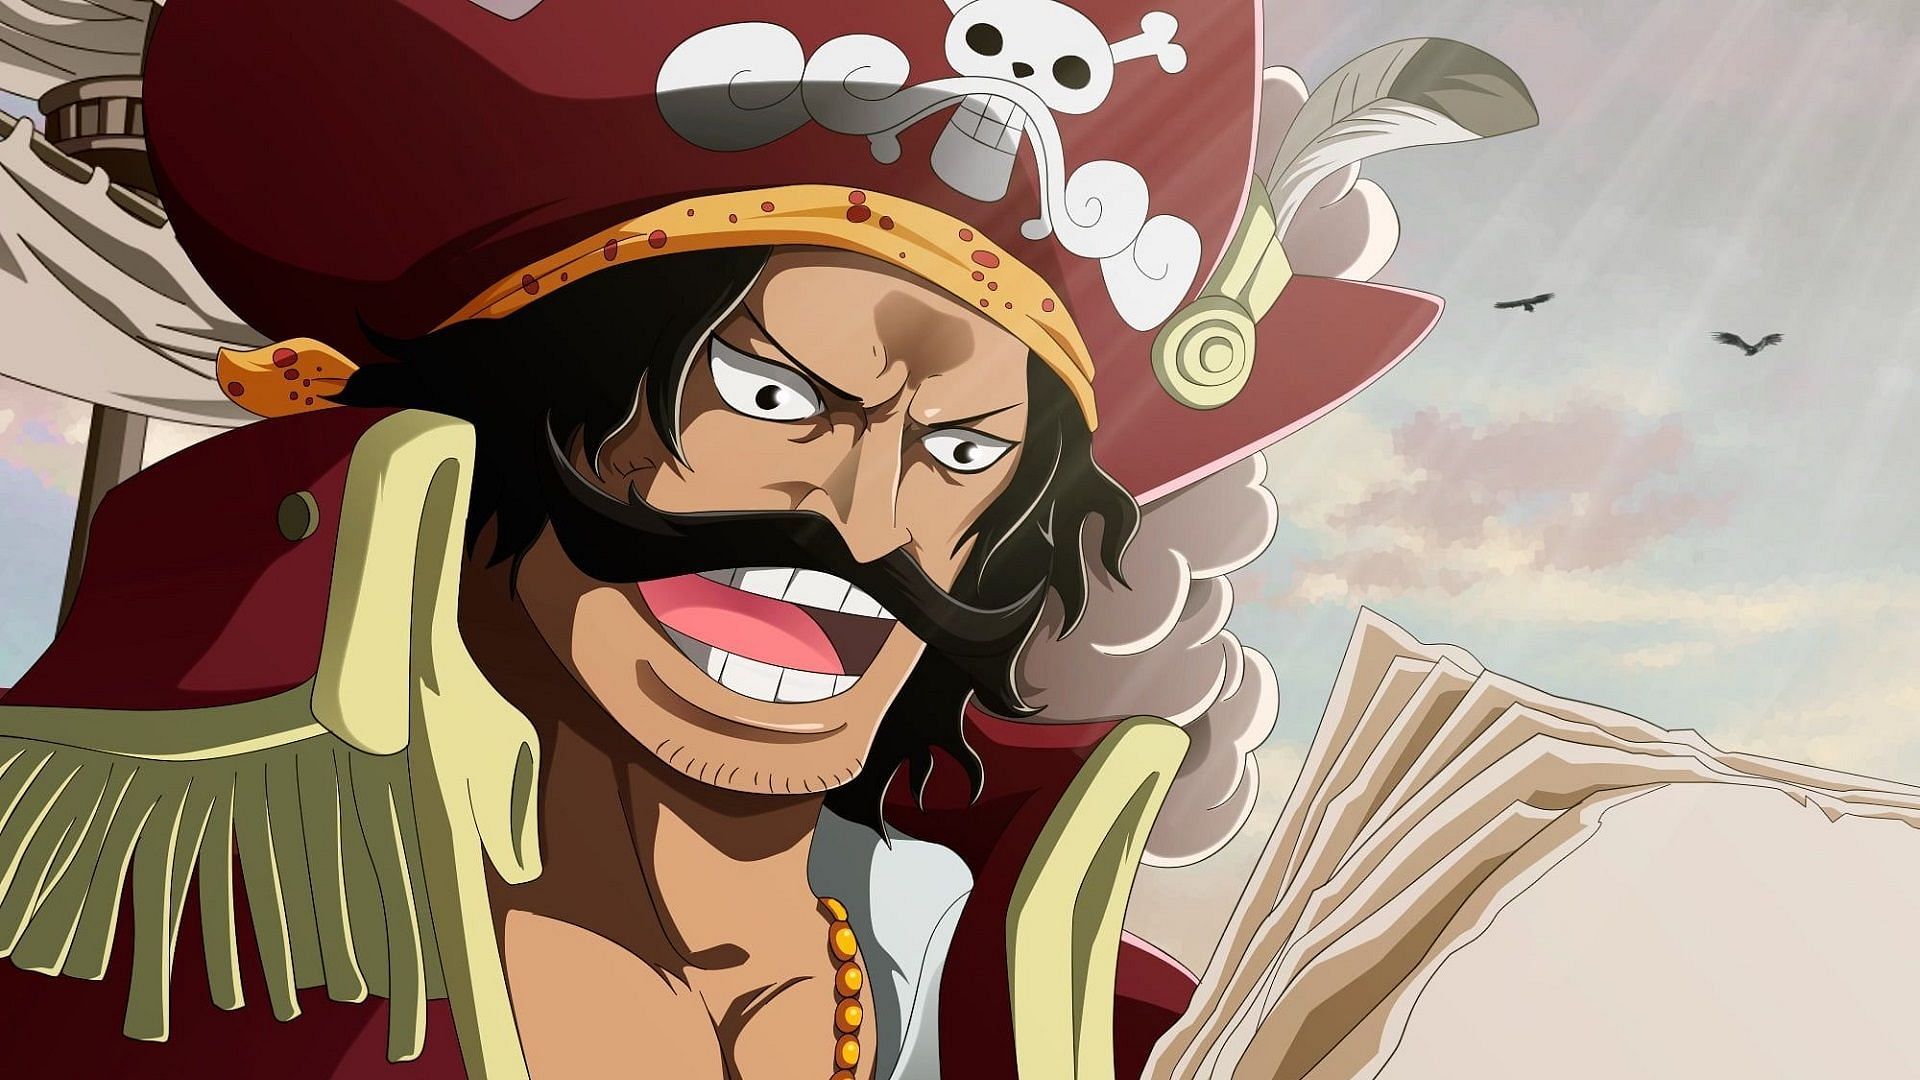 Gol D. Roger, the Pirate King, surrendered himself knowing that he was affected by an incurable disease (Image via Eiichiro Oda/Shueisha, One Piece)